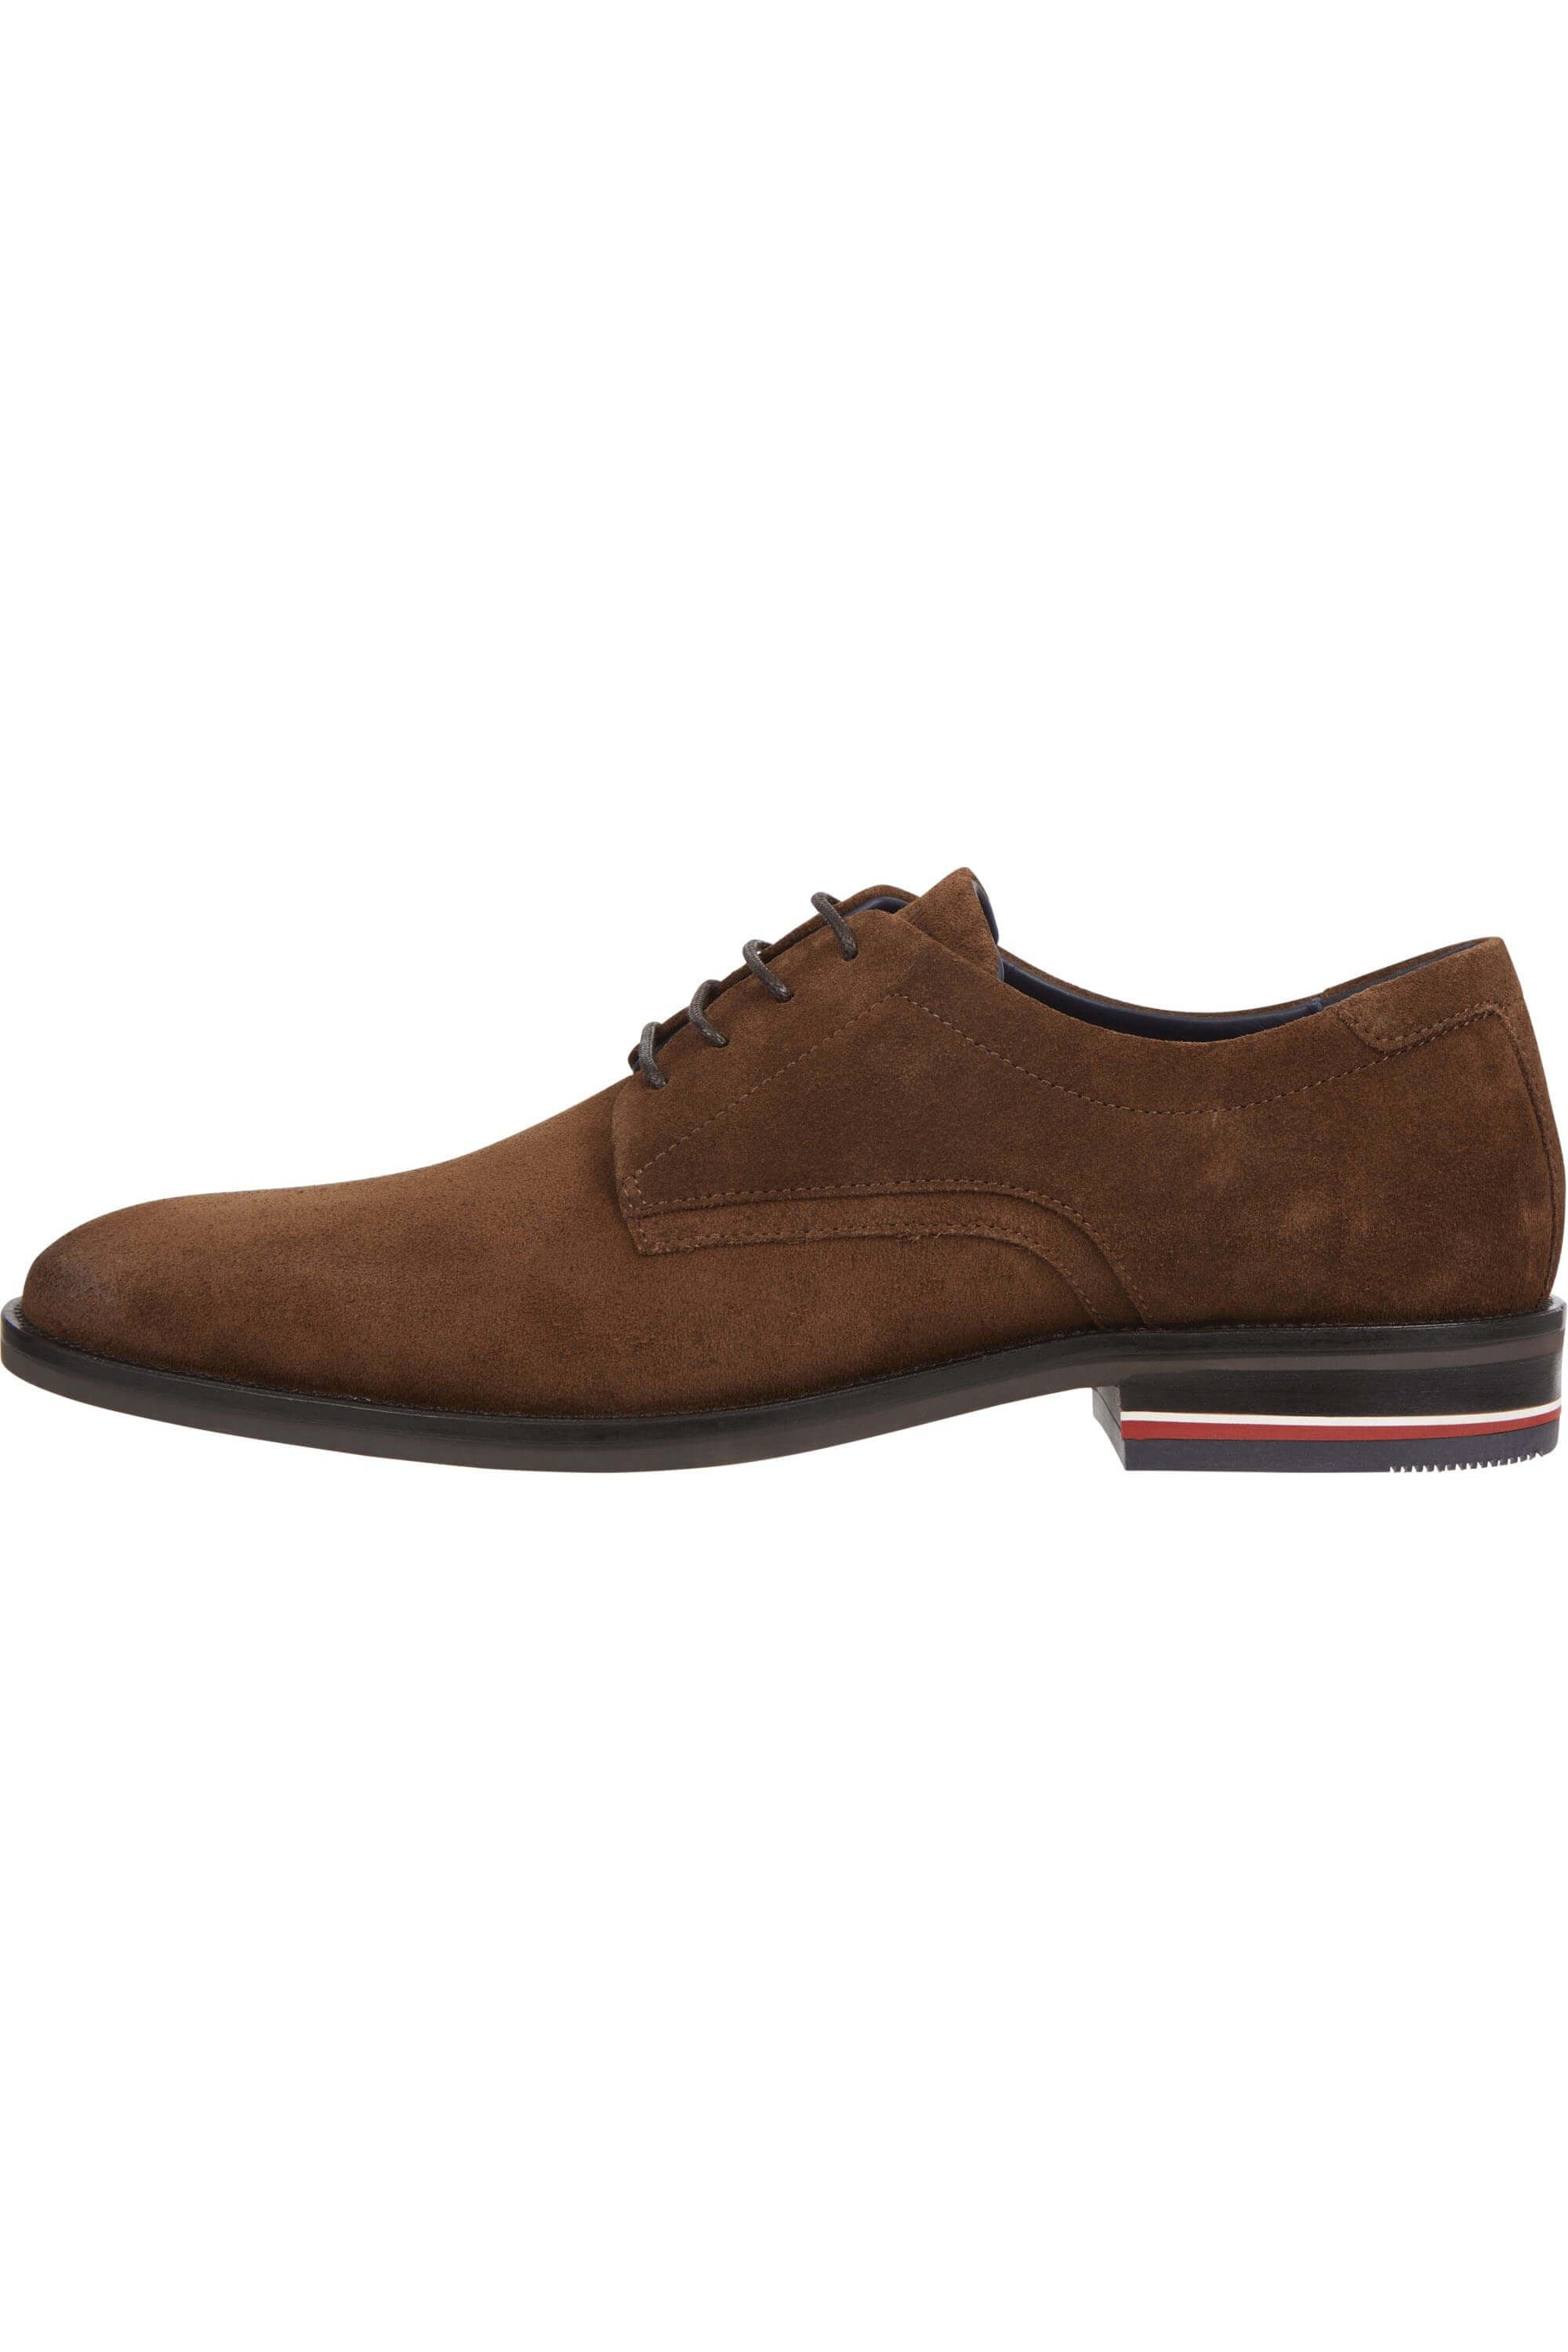 Tommy Hilfiger Corporate Suede Shoe Brown